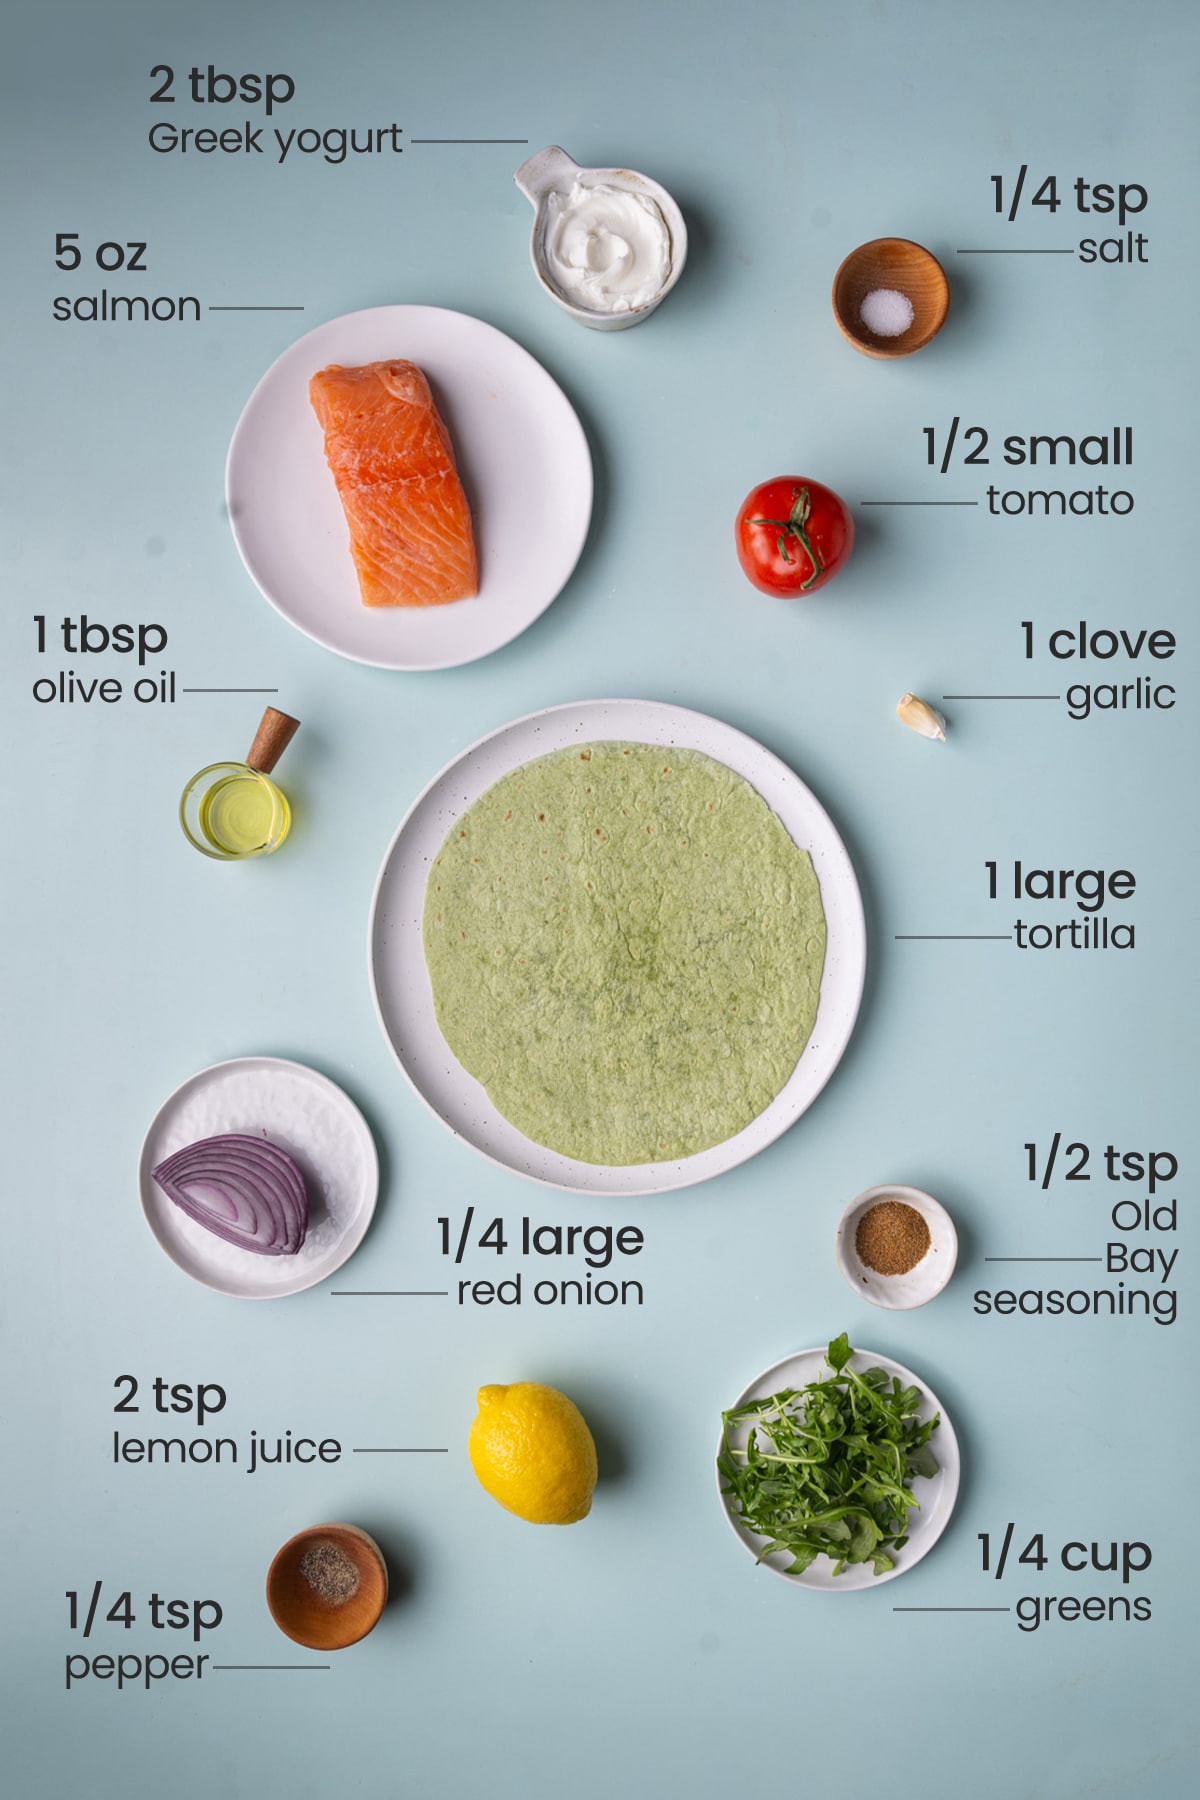 All ingredients needed for a Salmon Wrap including Greek yogurt, salt, salmon, tomato, olive oil, wrap, red onion, Old Bay seasoning, arugula, lemon, and pepper.